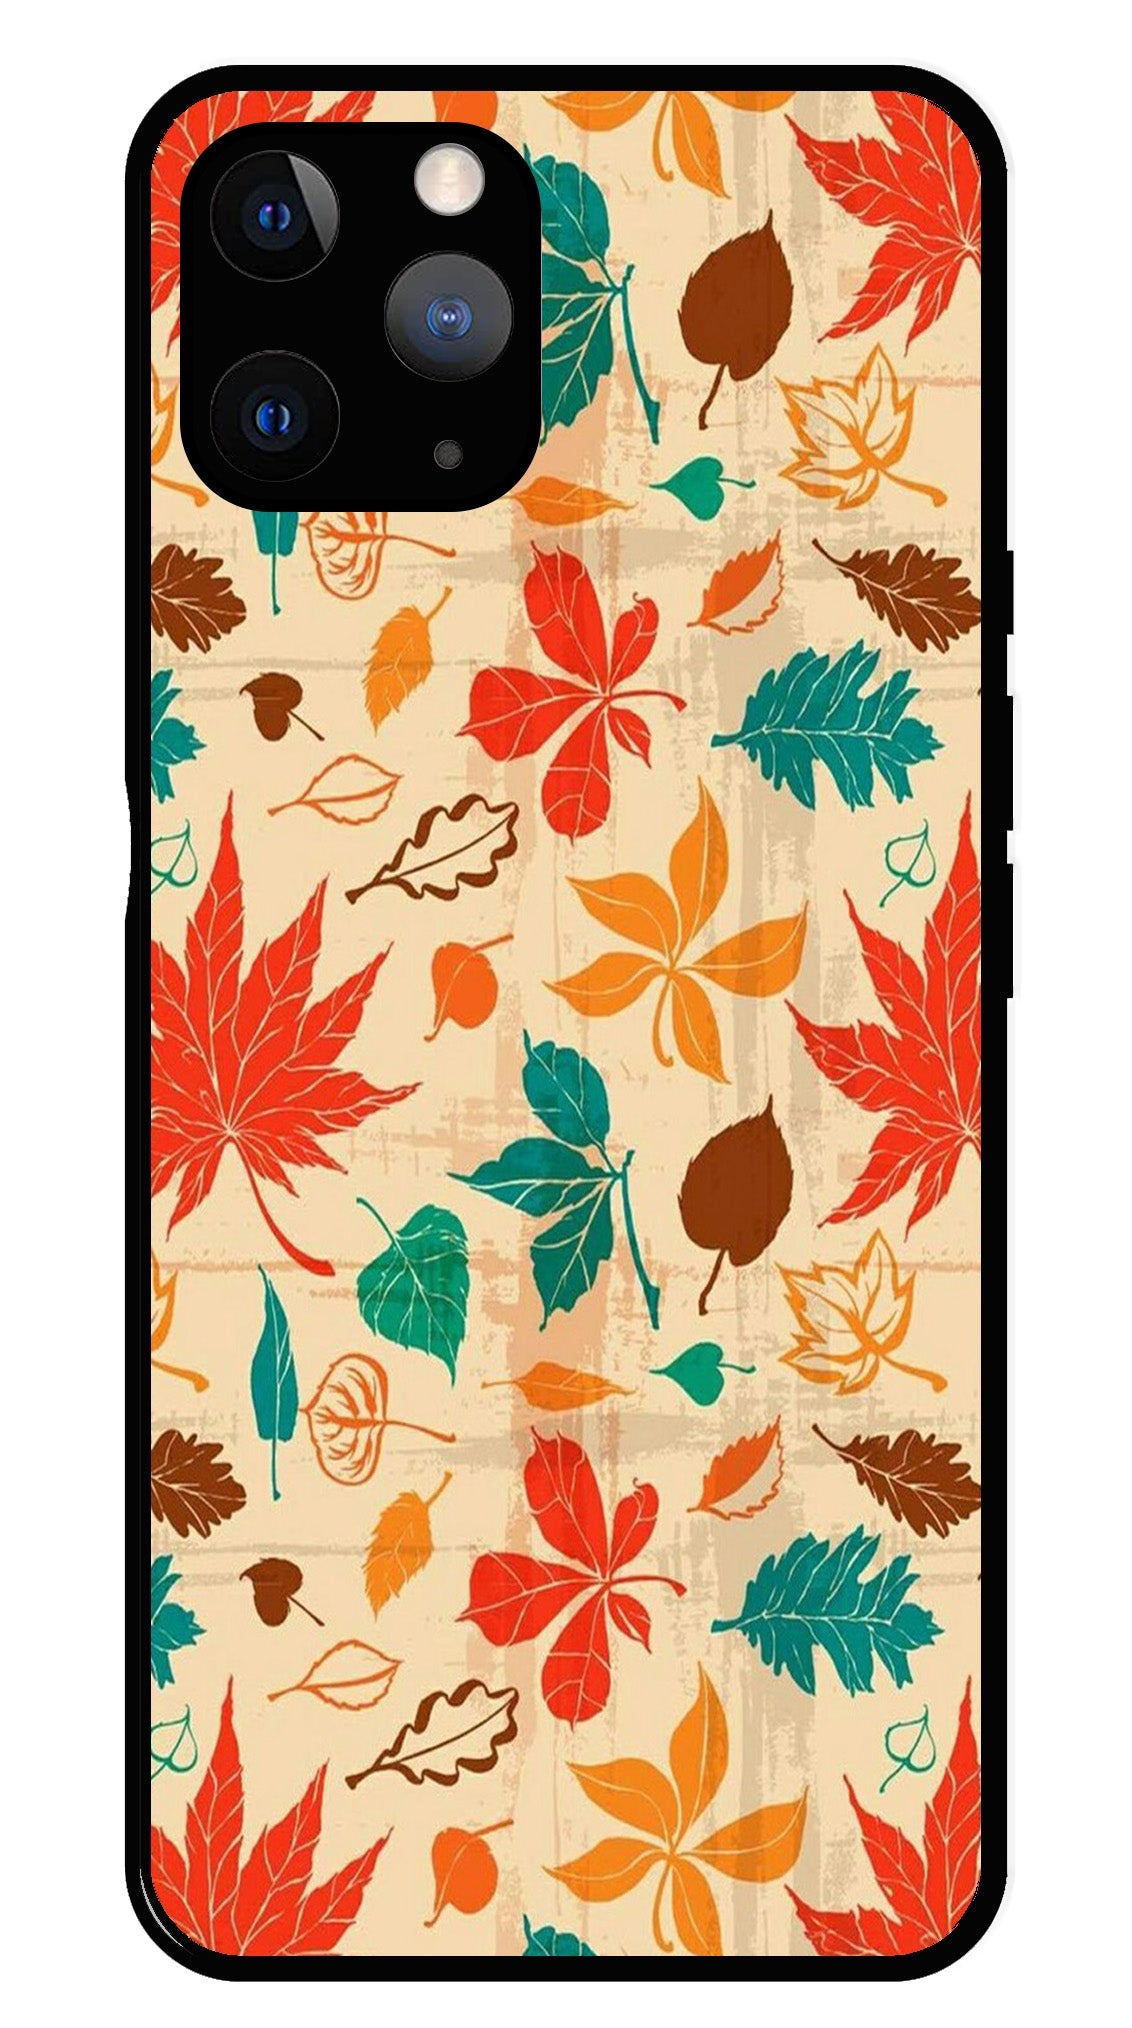 Leafs Design Metal Mobile Case for iPhone 11 Pro Max